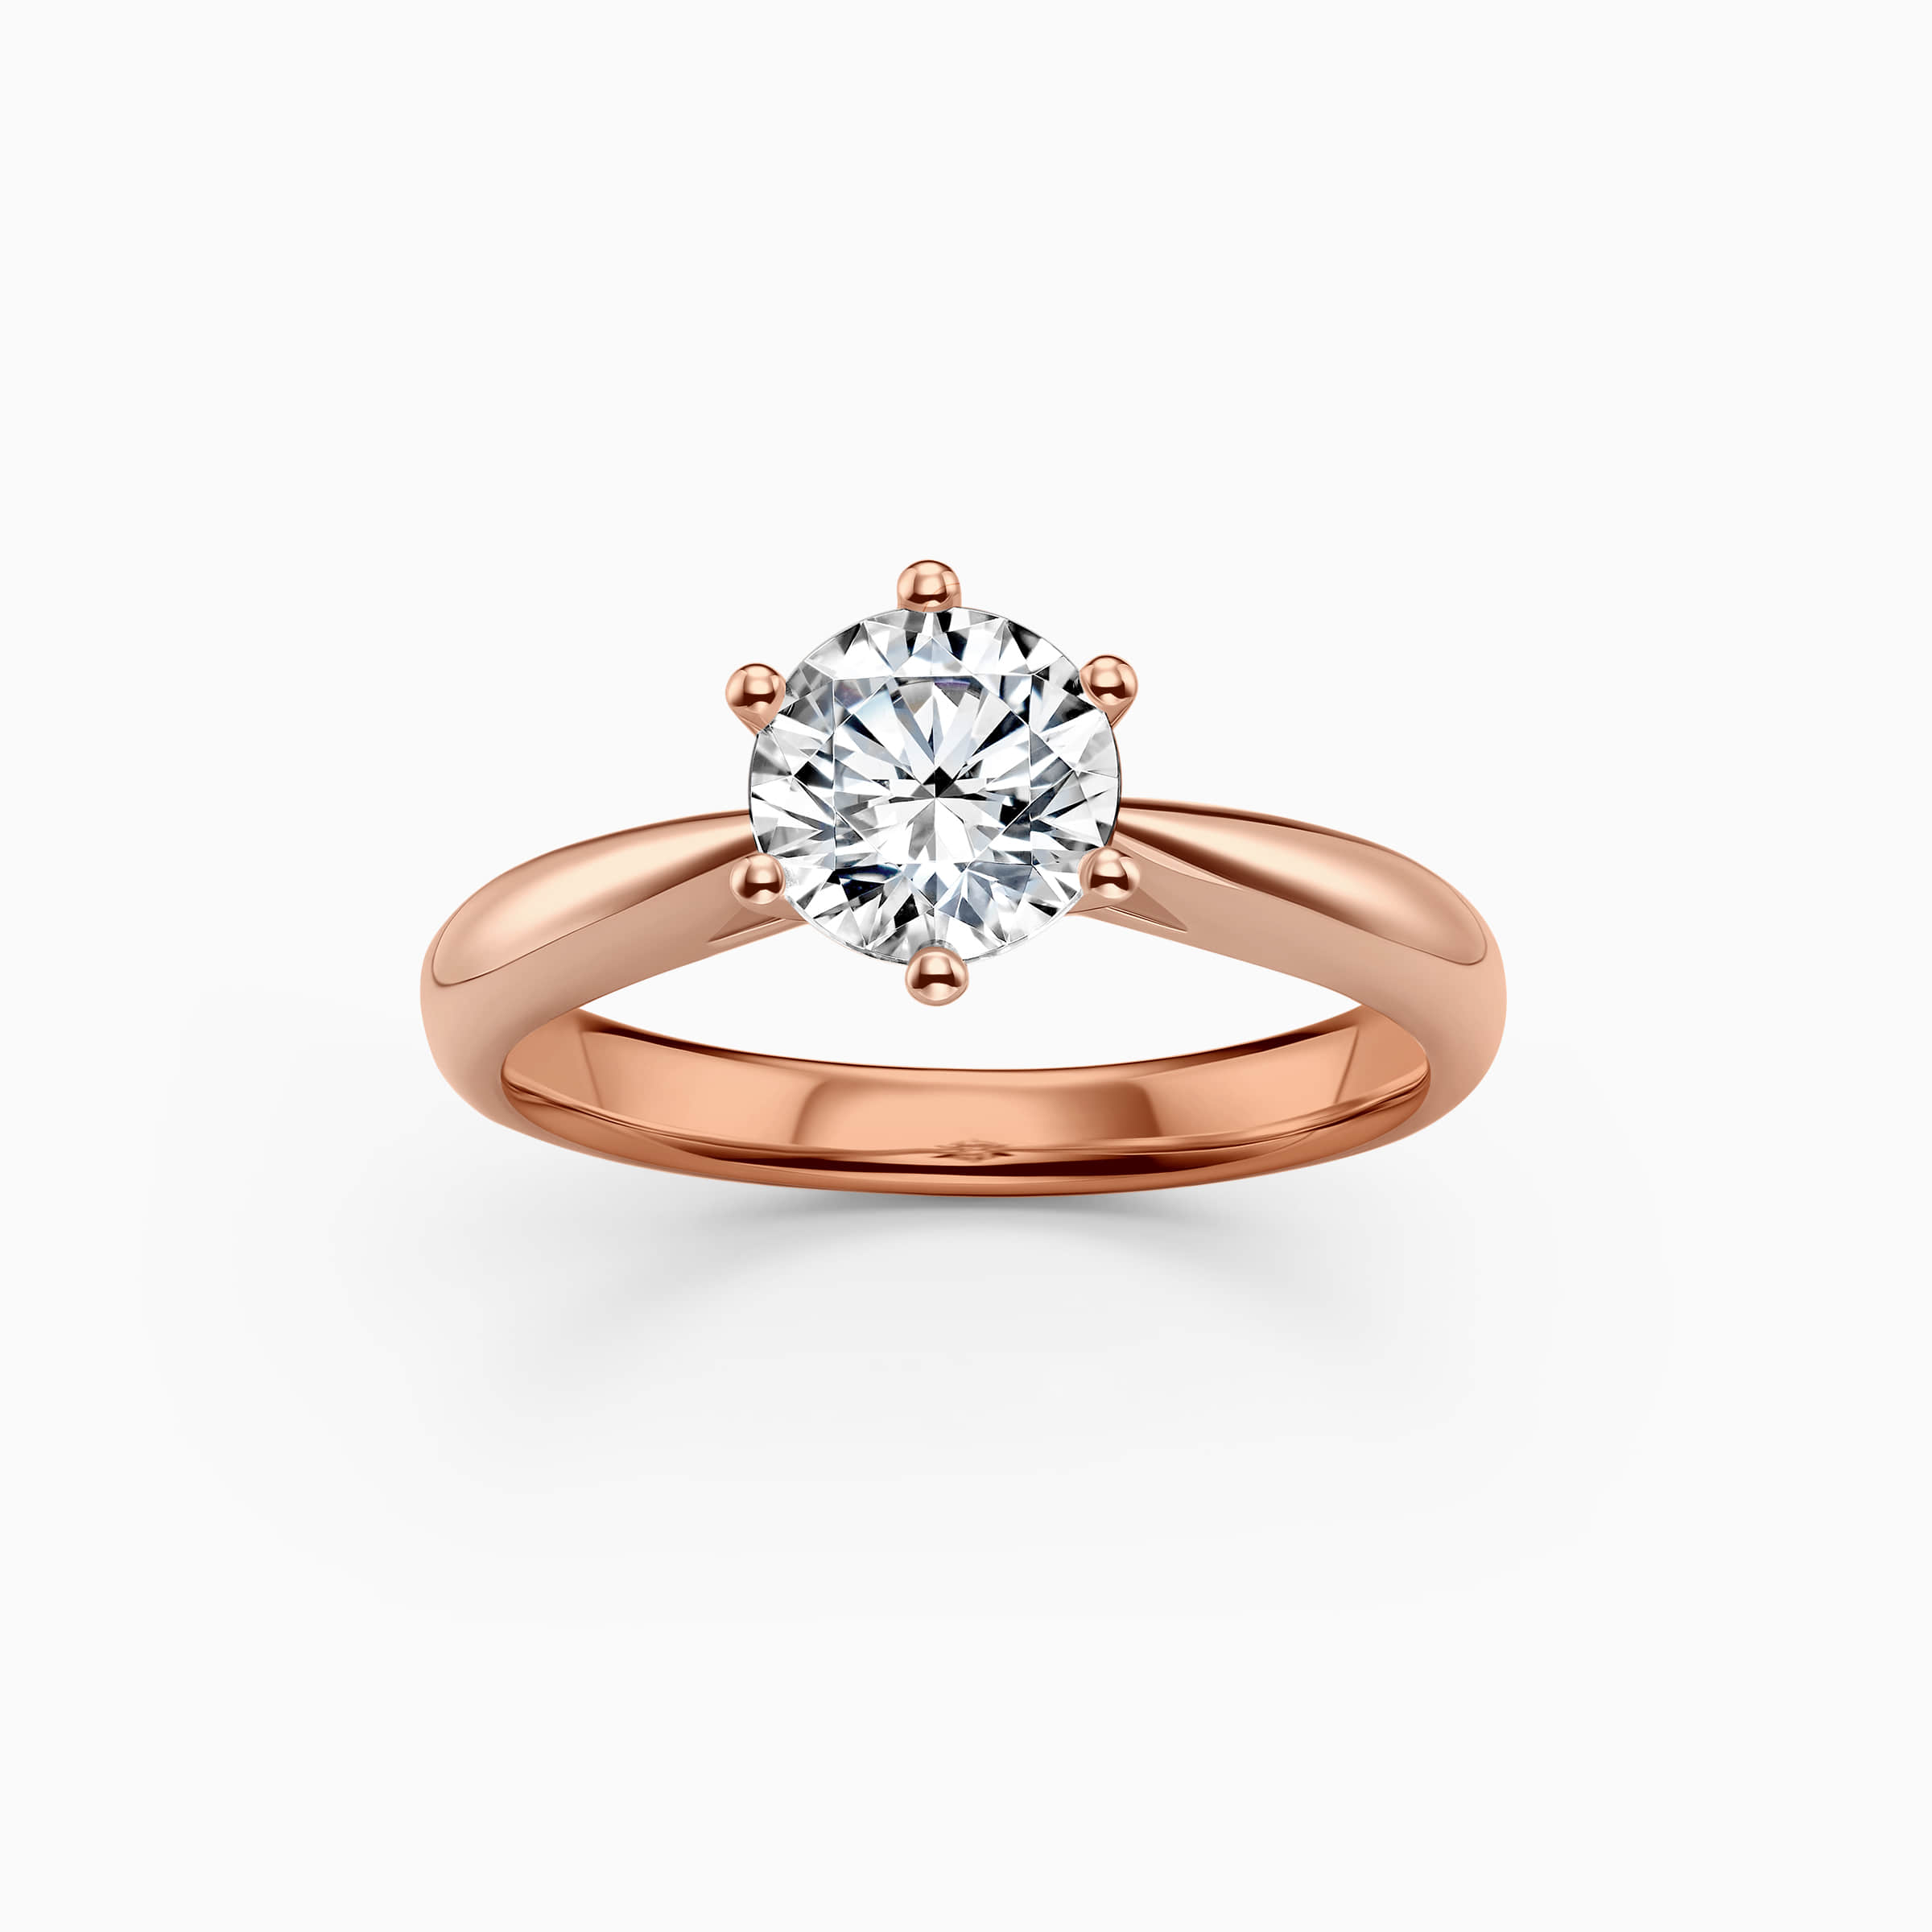 Darry Ring 6 prong solitaire engagement ring rose gold